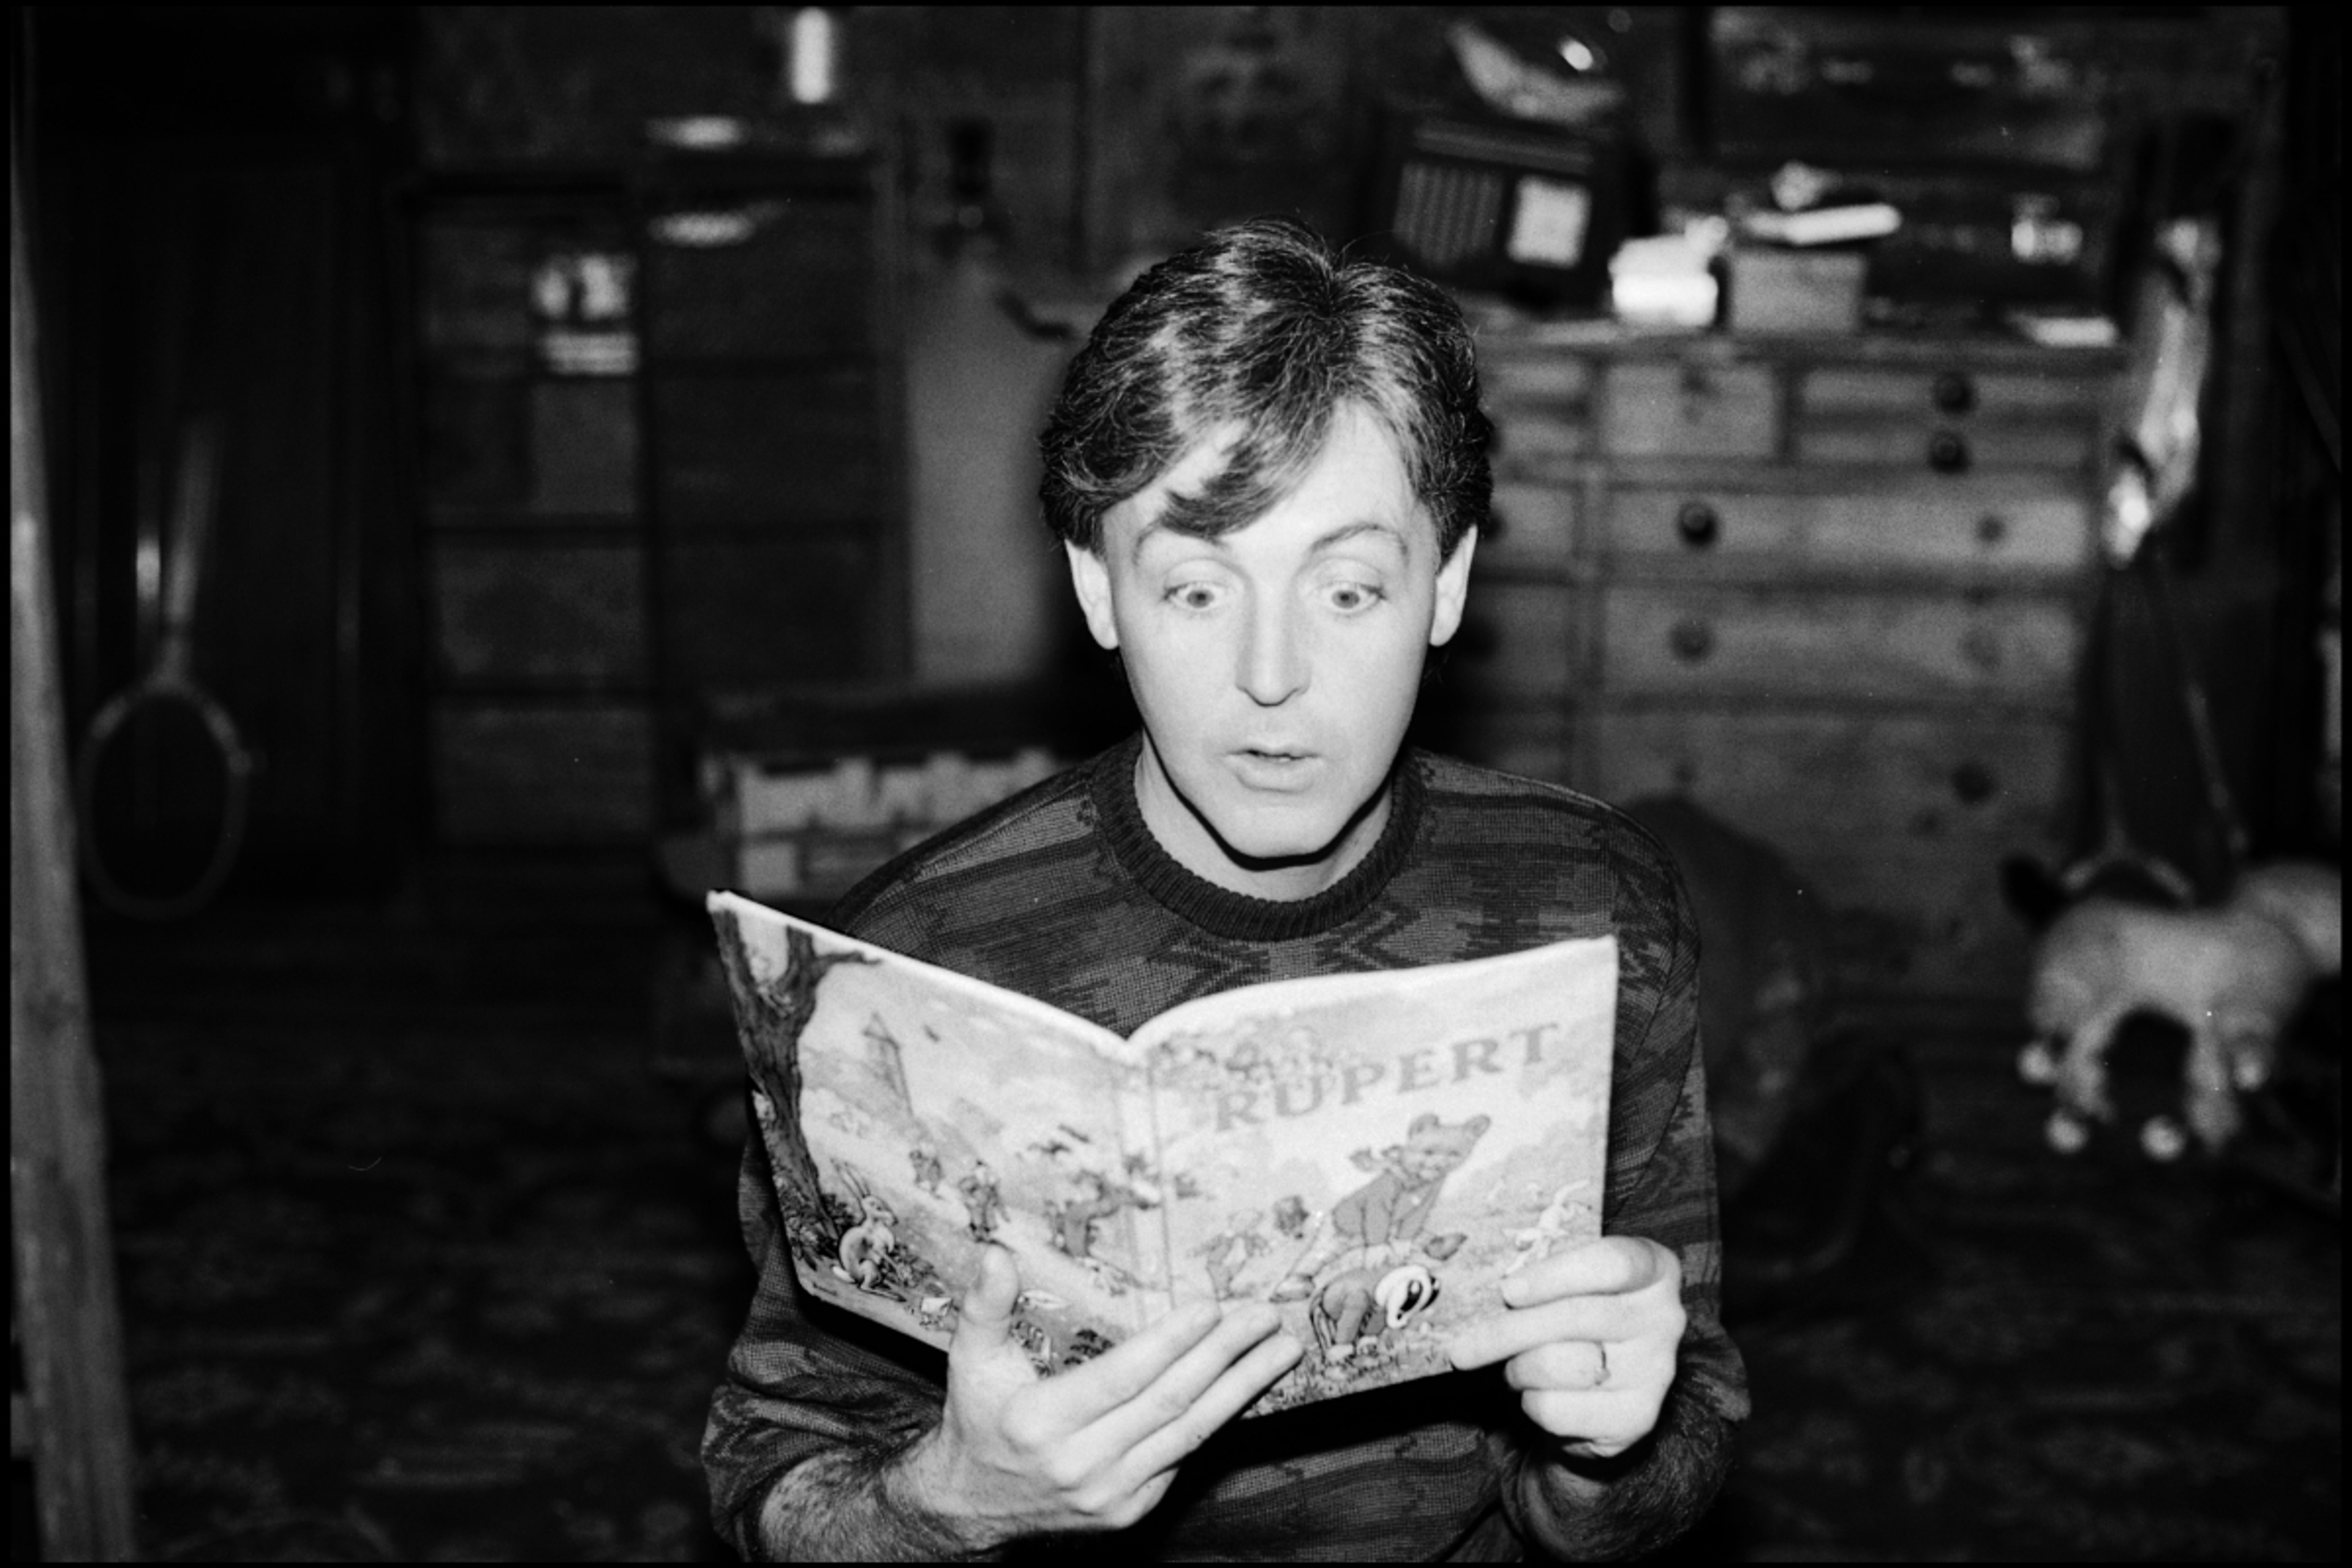 Paul reading his Rupert annual in the 'We All Stand Together' music video